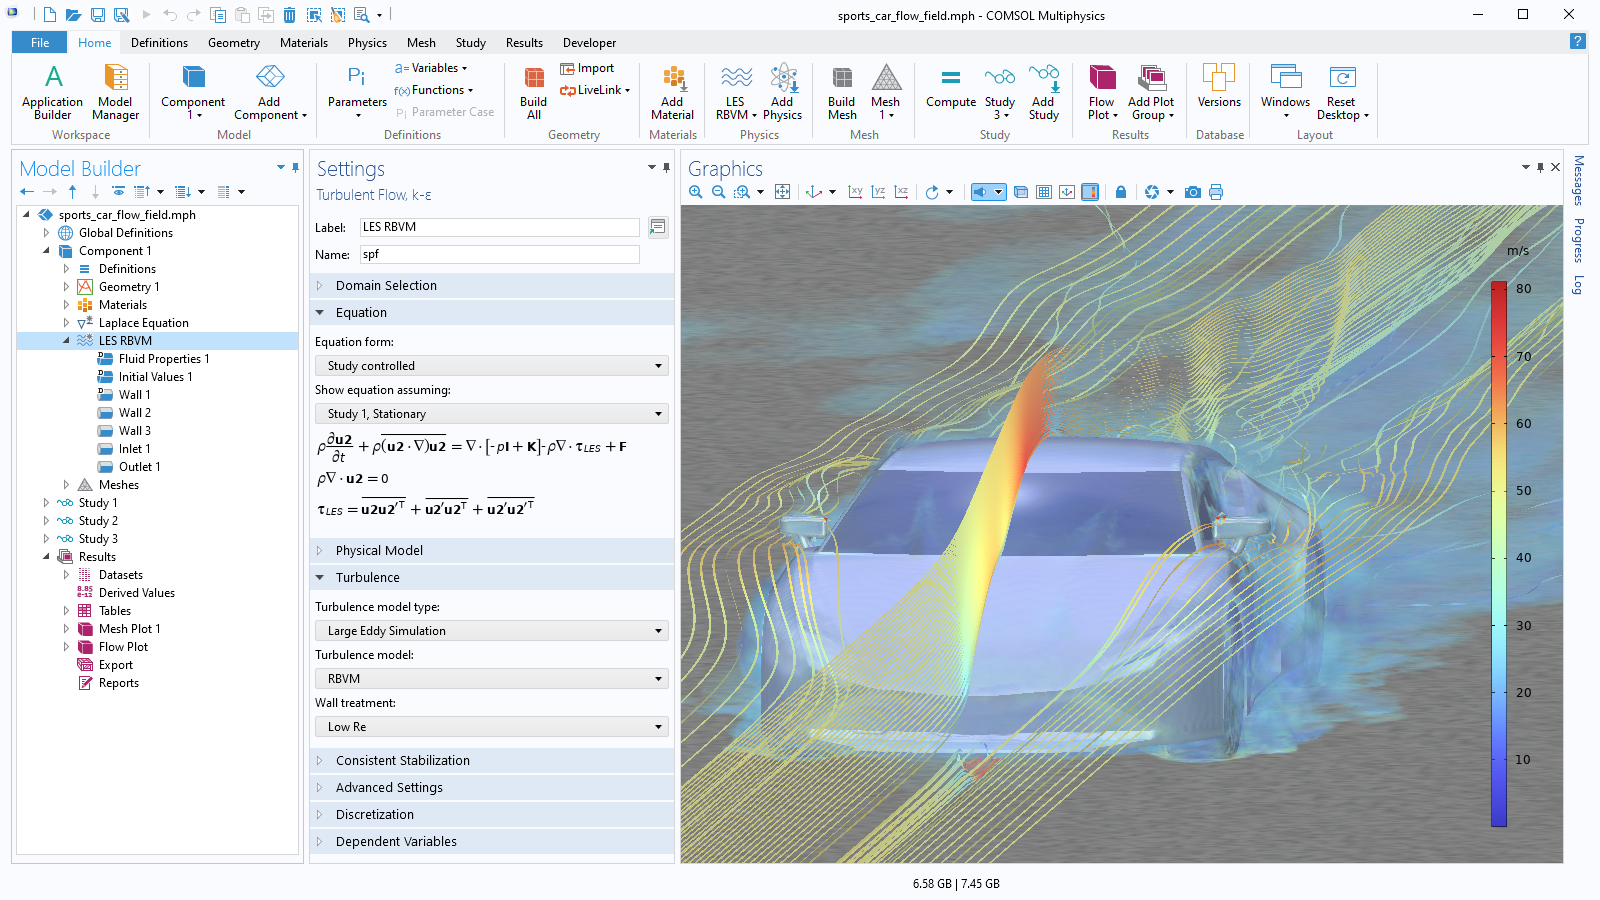 The COMSOL Multiphysics UI showing the Model Builder with a Turbulent Flow node highlighted, the corresponding Settings window, and a sports car model in the Graphics window.